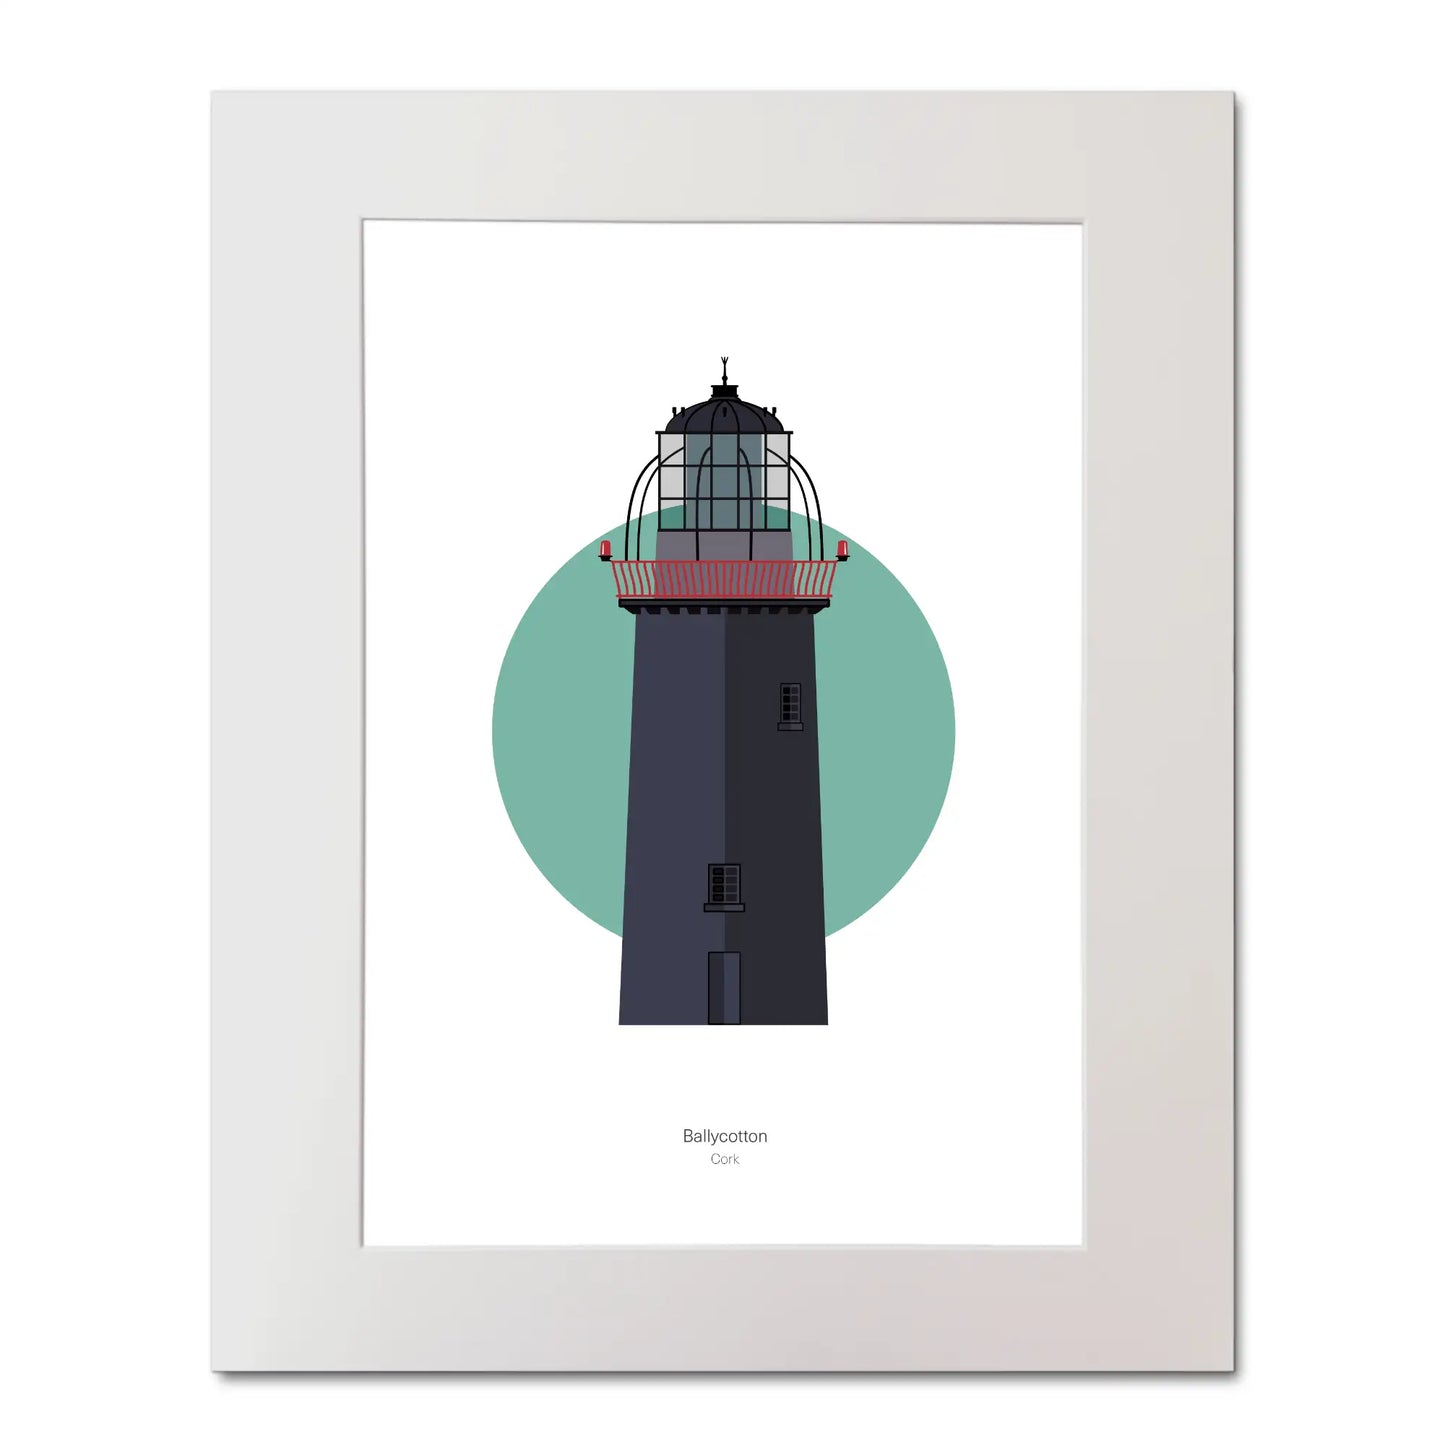 Illustration of Ballycotton lighthouse on a white background inside light blue square, mounted and measuring 40x50cm.